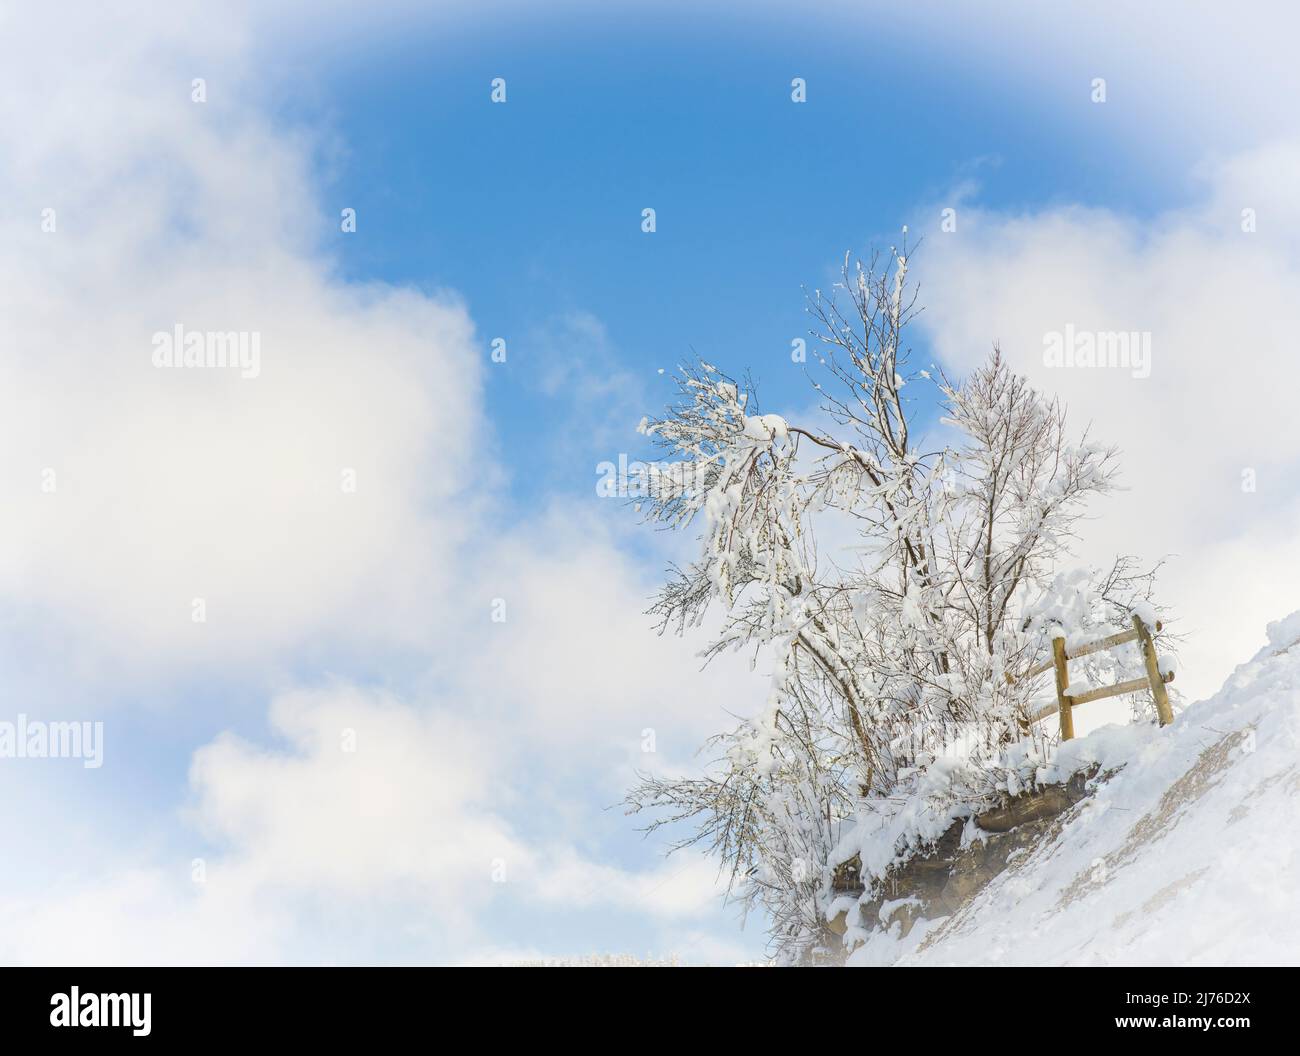 Tree in winter, blue sky, clouds Stock Photo